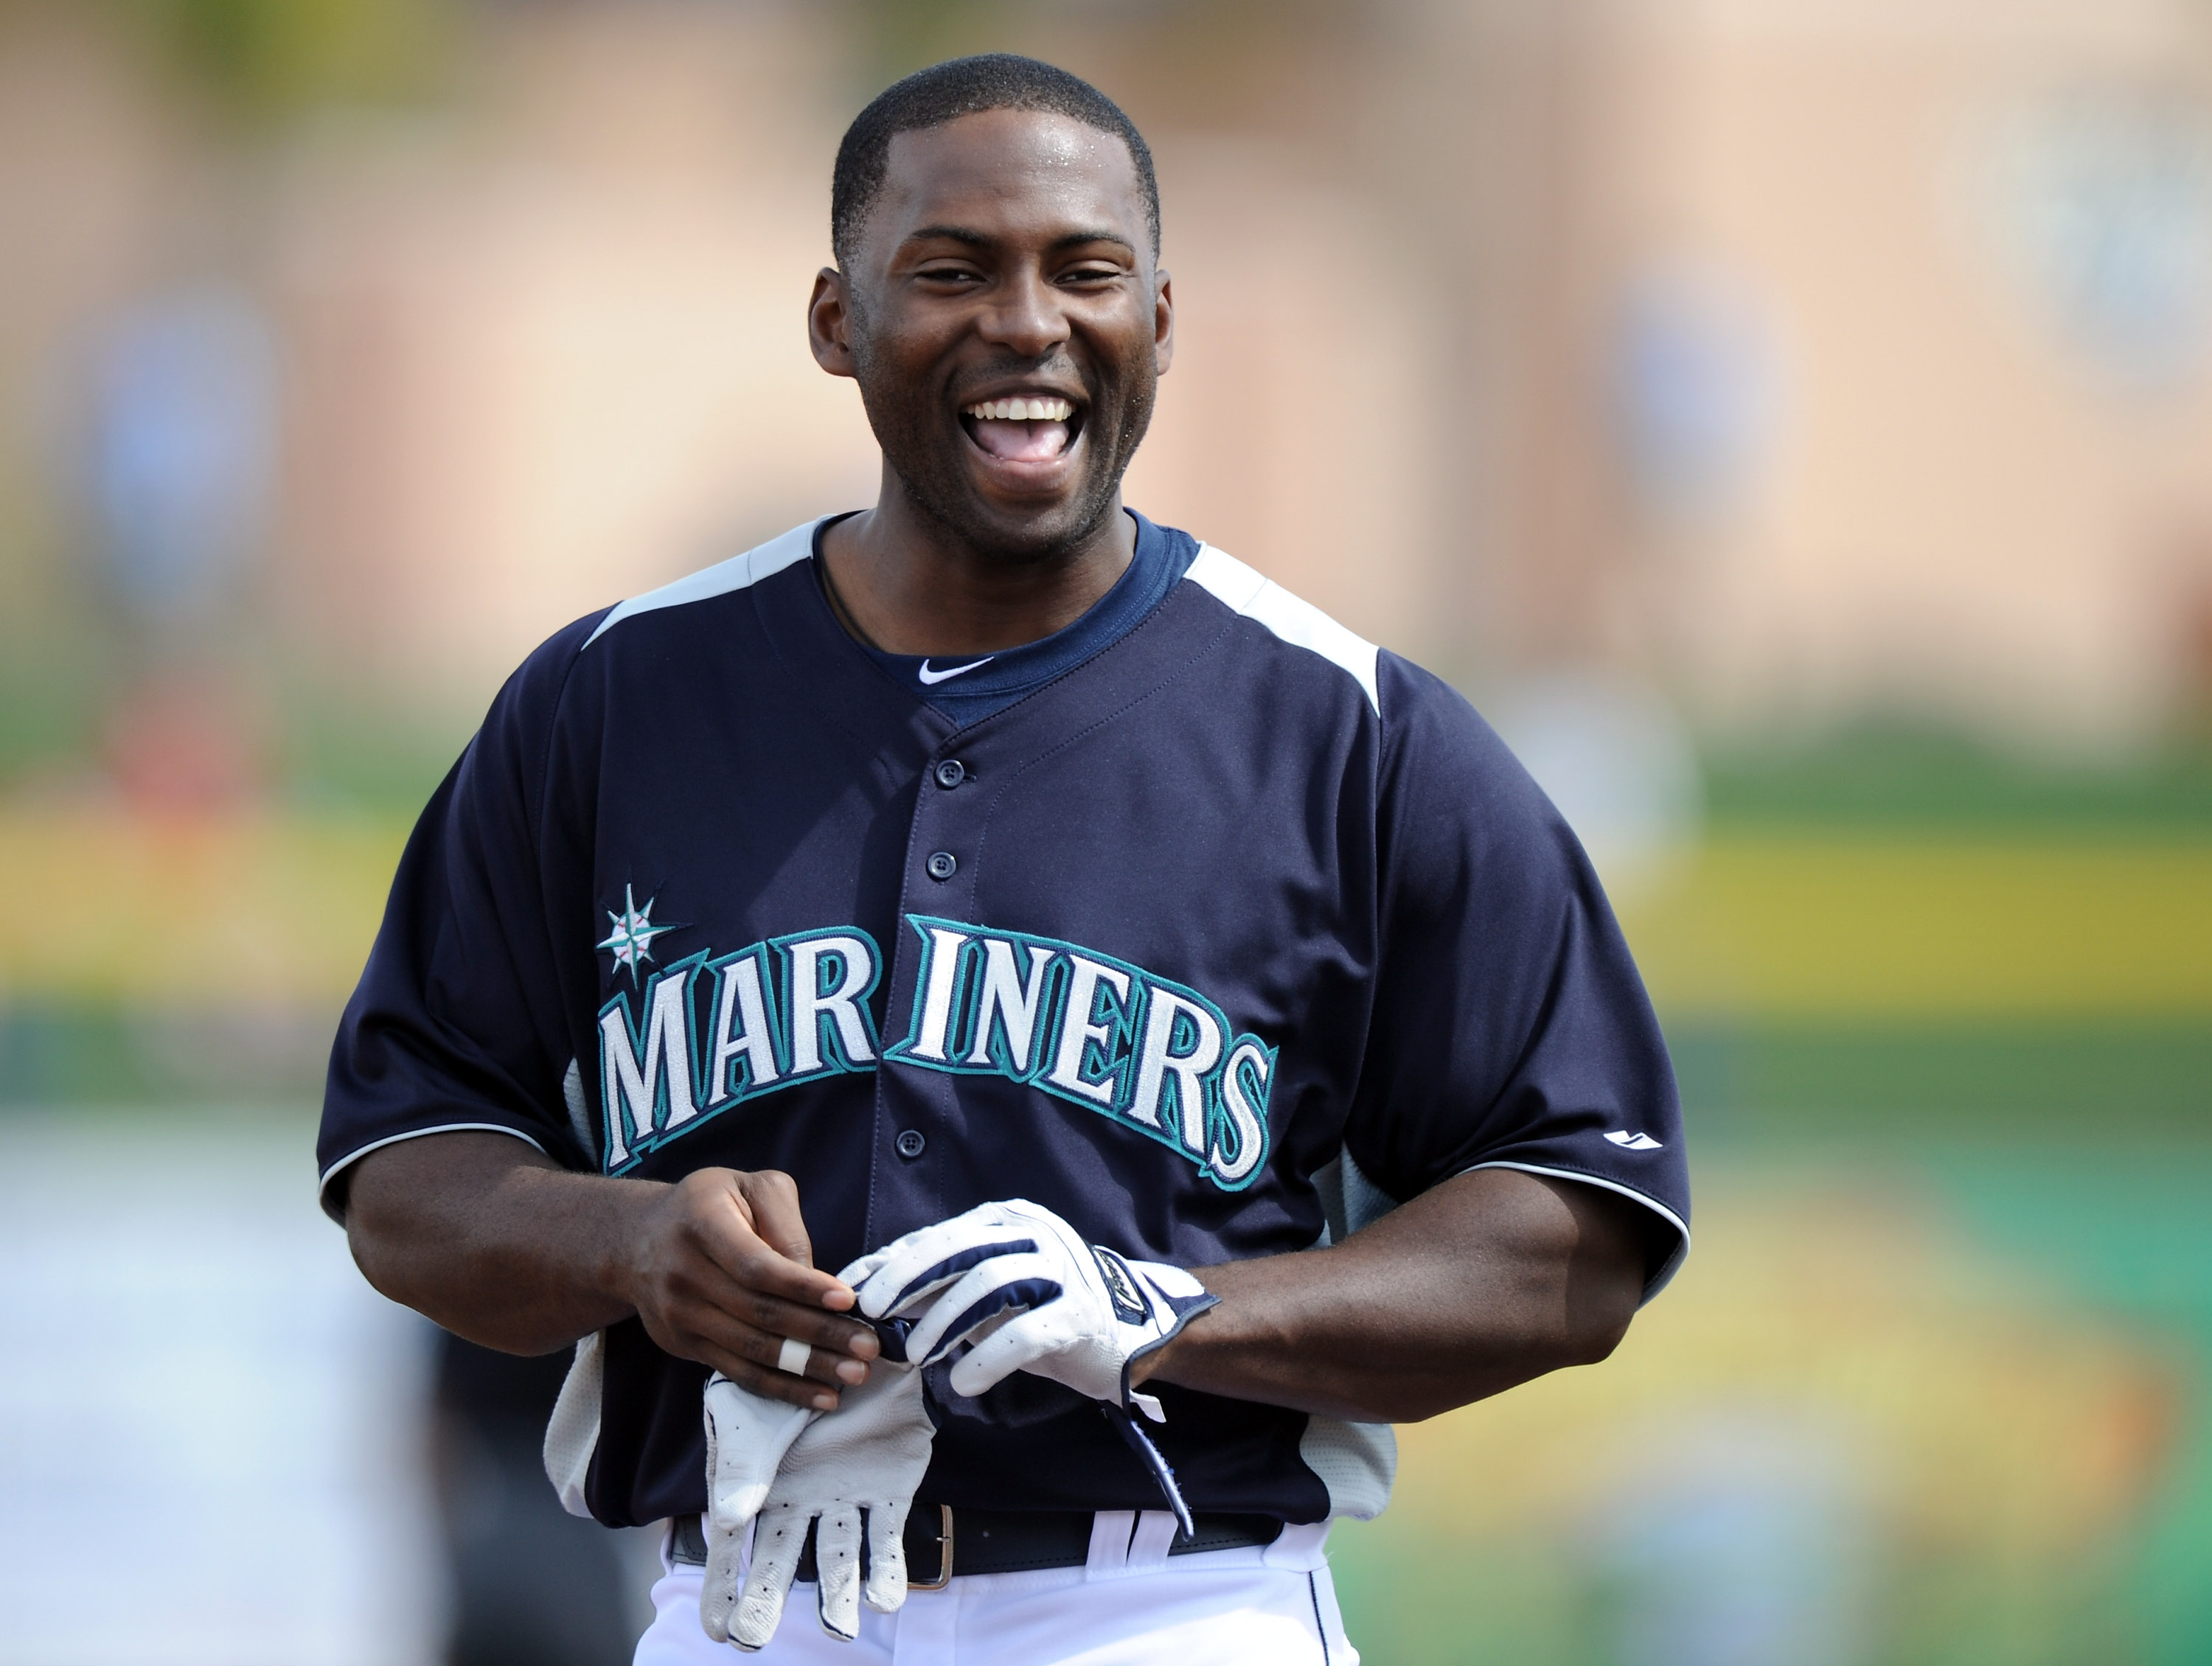 PEORIA, AZ - MARCH 01:  Milton Bradley #15 of the Seattle Mariners smiles as he leaves the field against the Texas Rangers during spring training at Peoria Stadium on March 1, 2011 in Peoria, Arizona.  (Photo by Harry How/Getty Images)